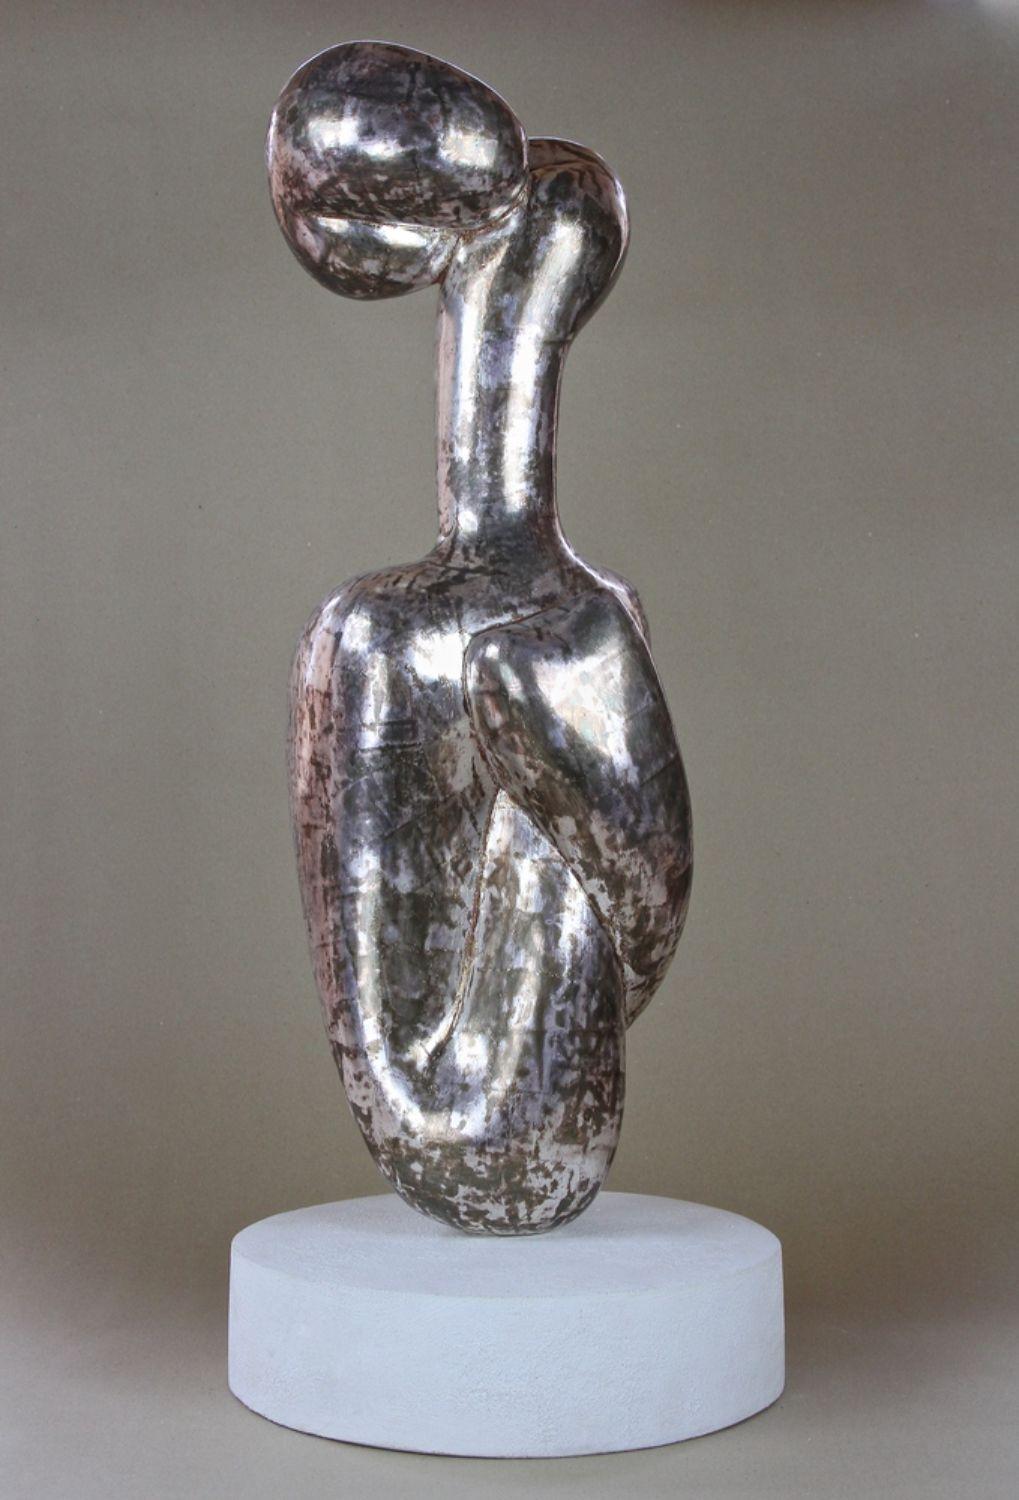 Abstract Contemporary Silvered Sculpture by M. Treml, Handcarved, Austria 2018 For Sale 8